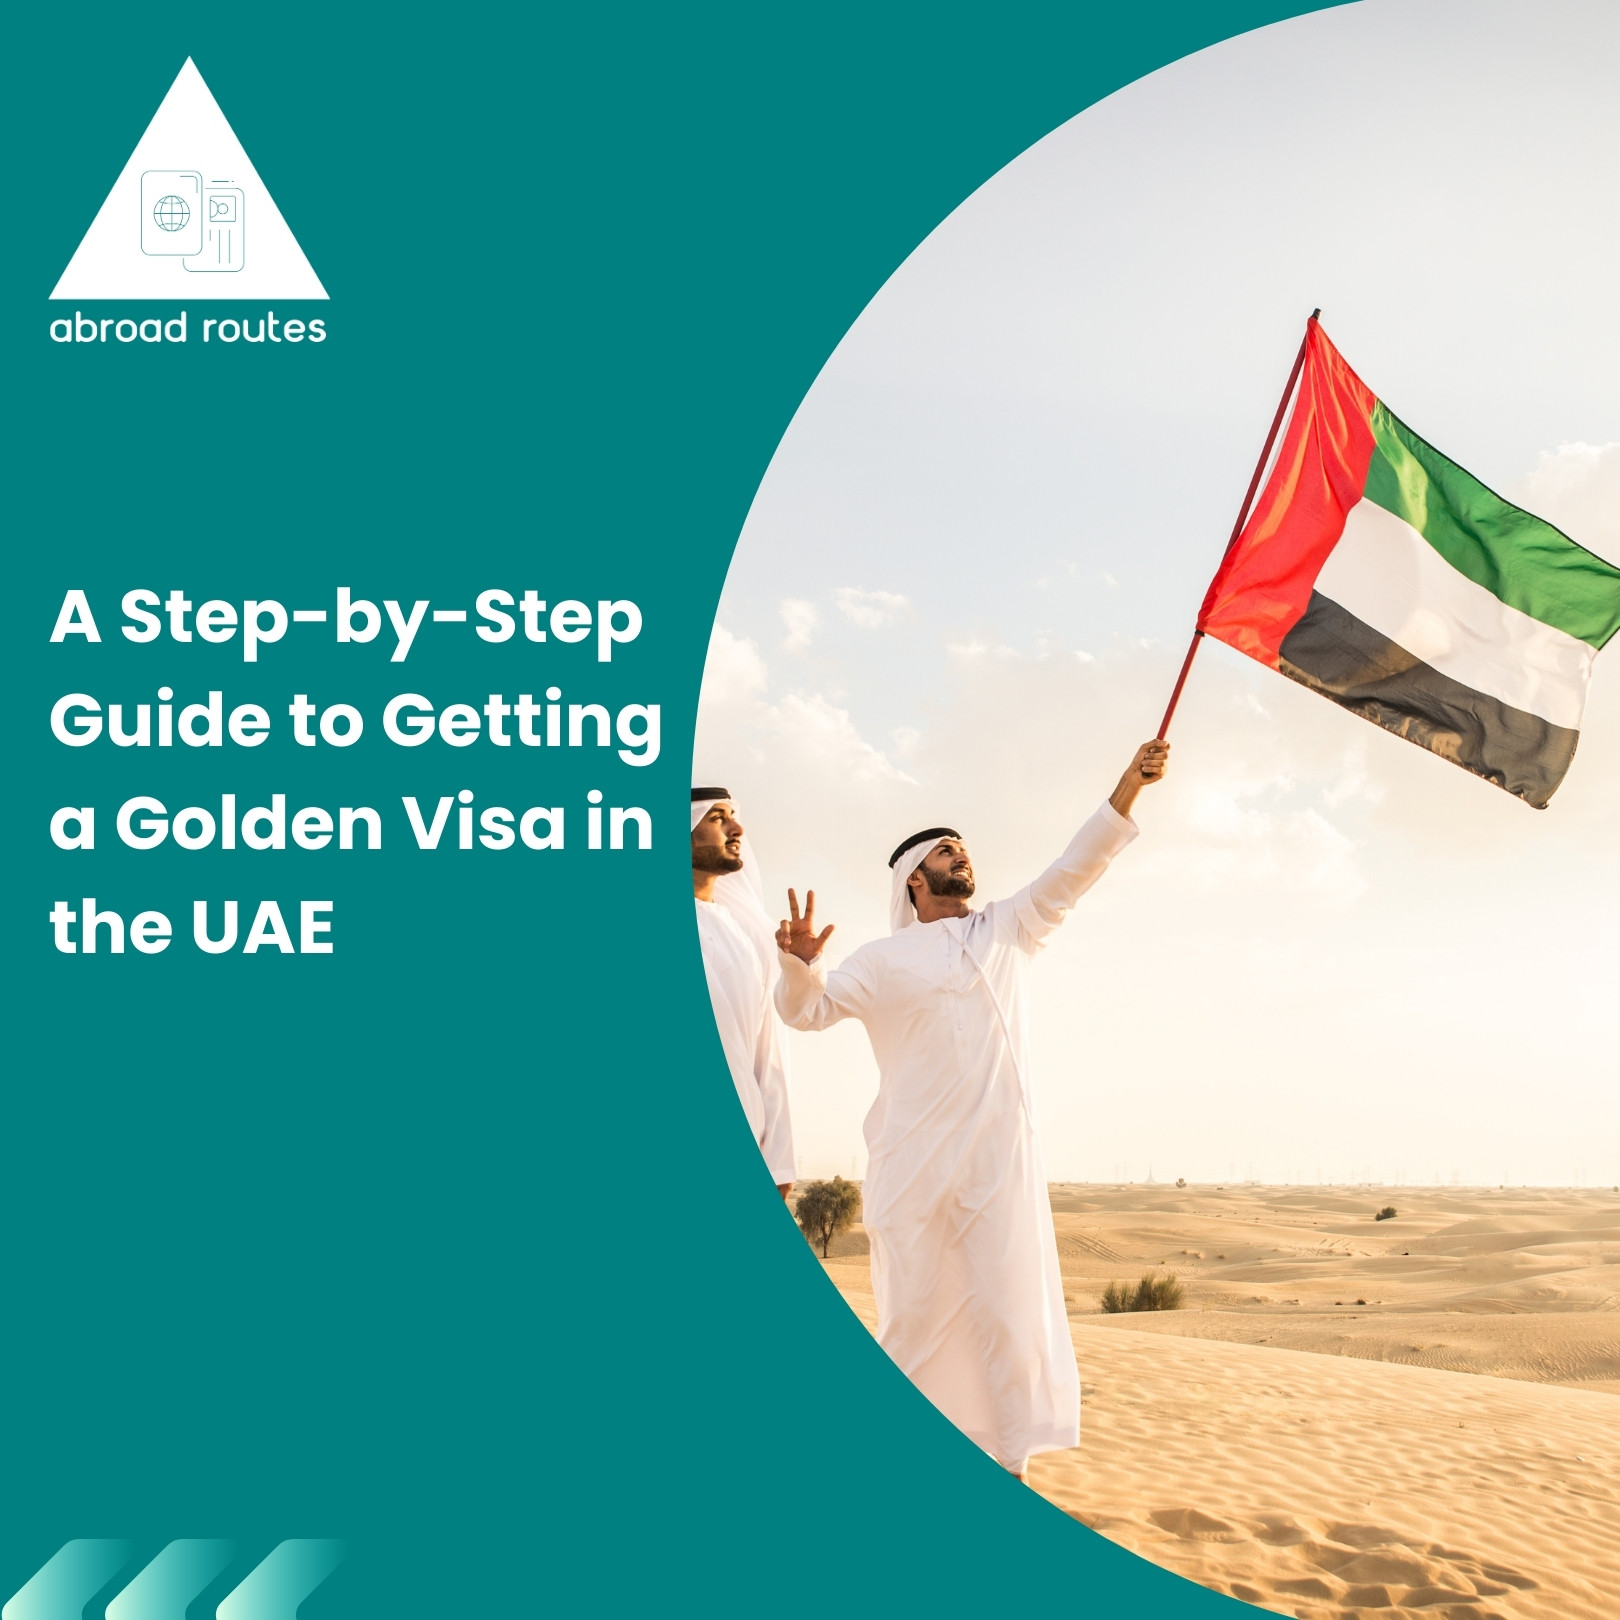 A Step-by-Step Guide to Getting a Golden Visa in the UAE